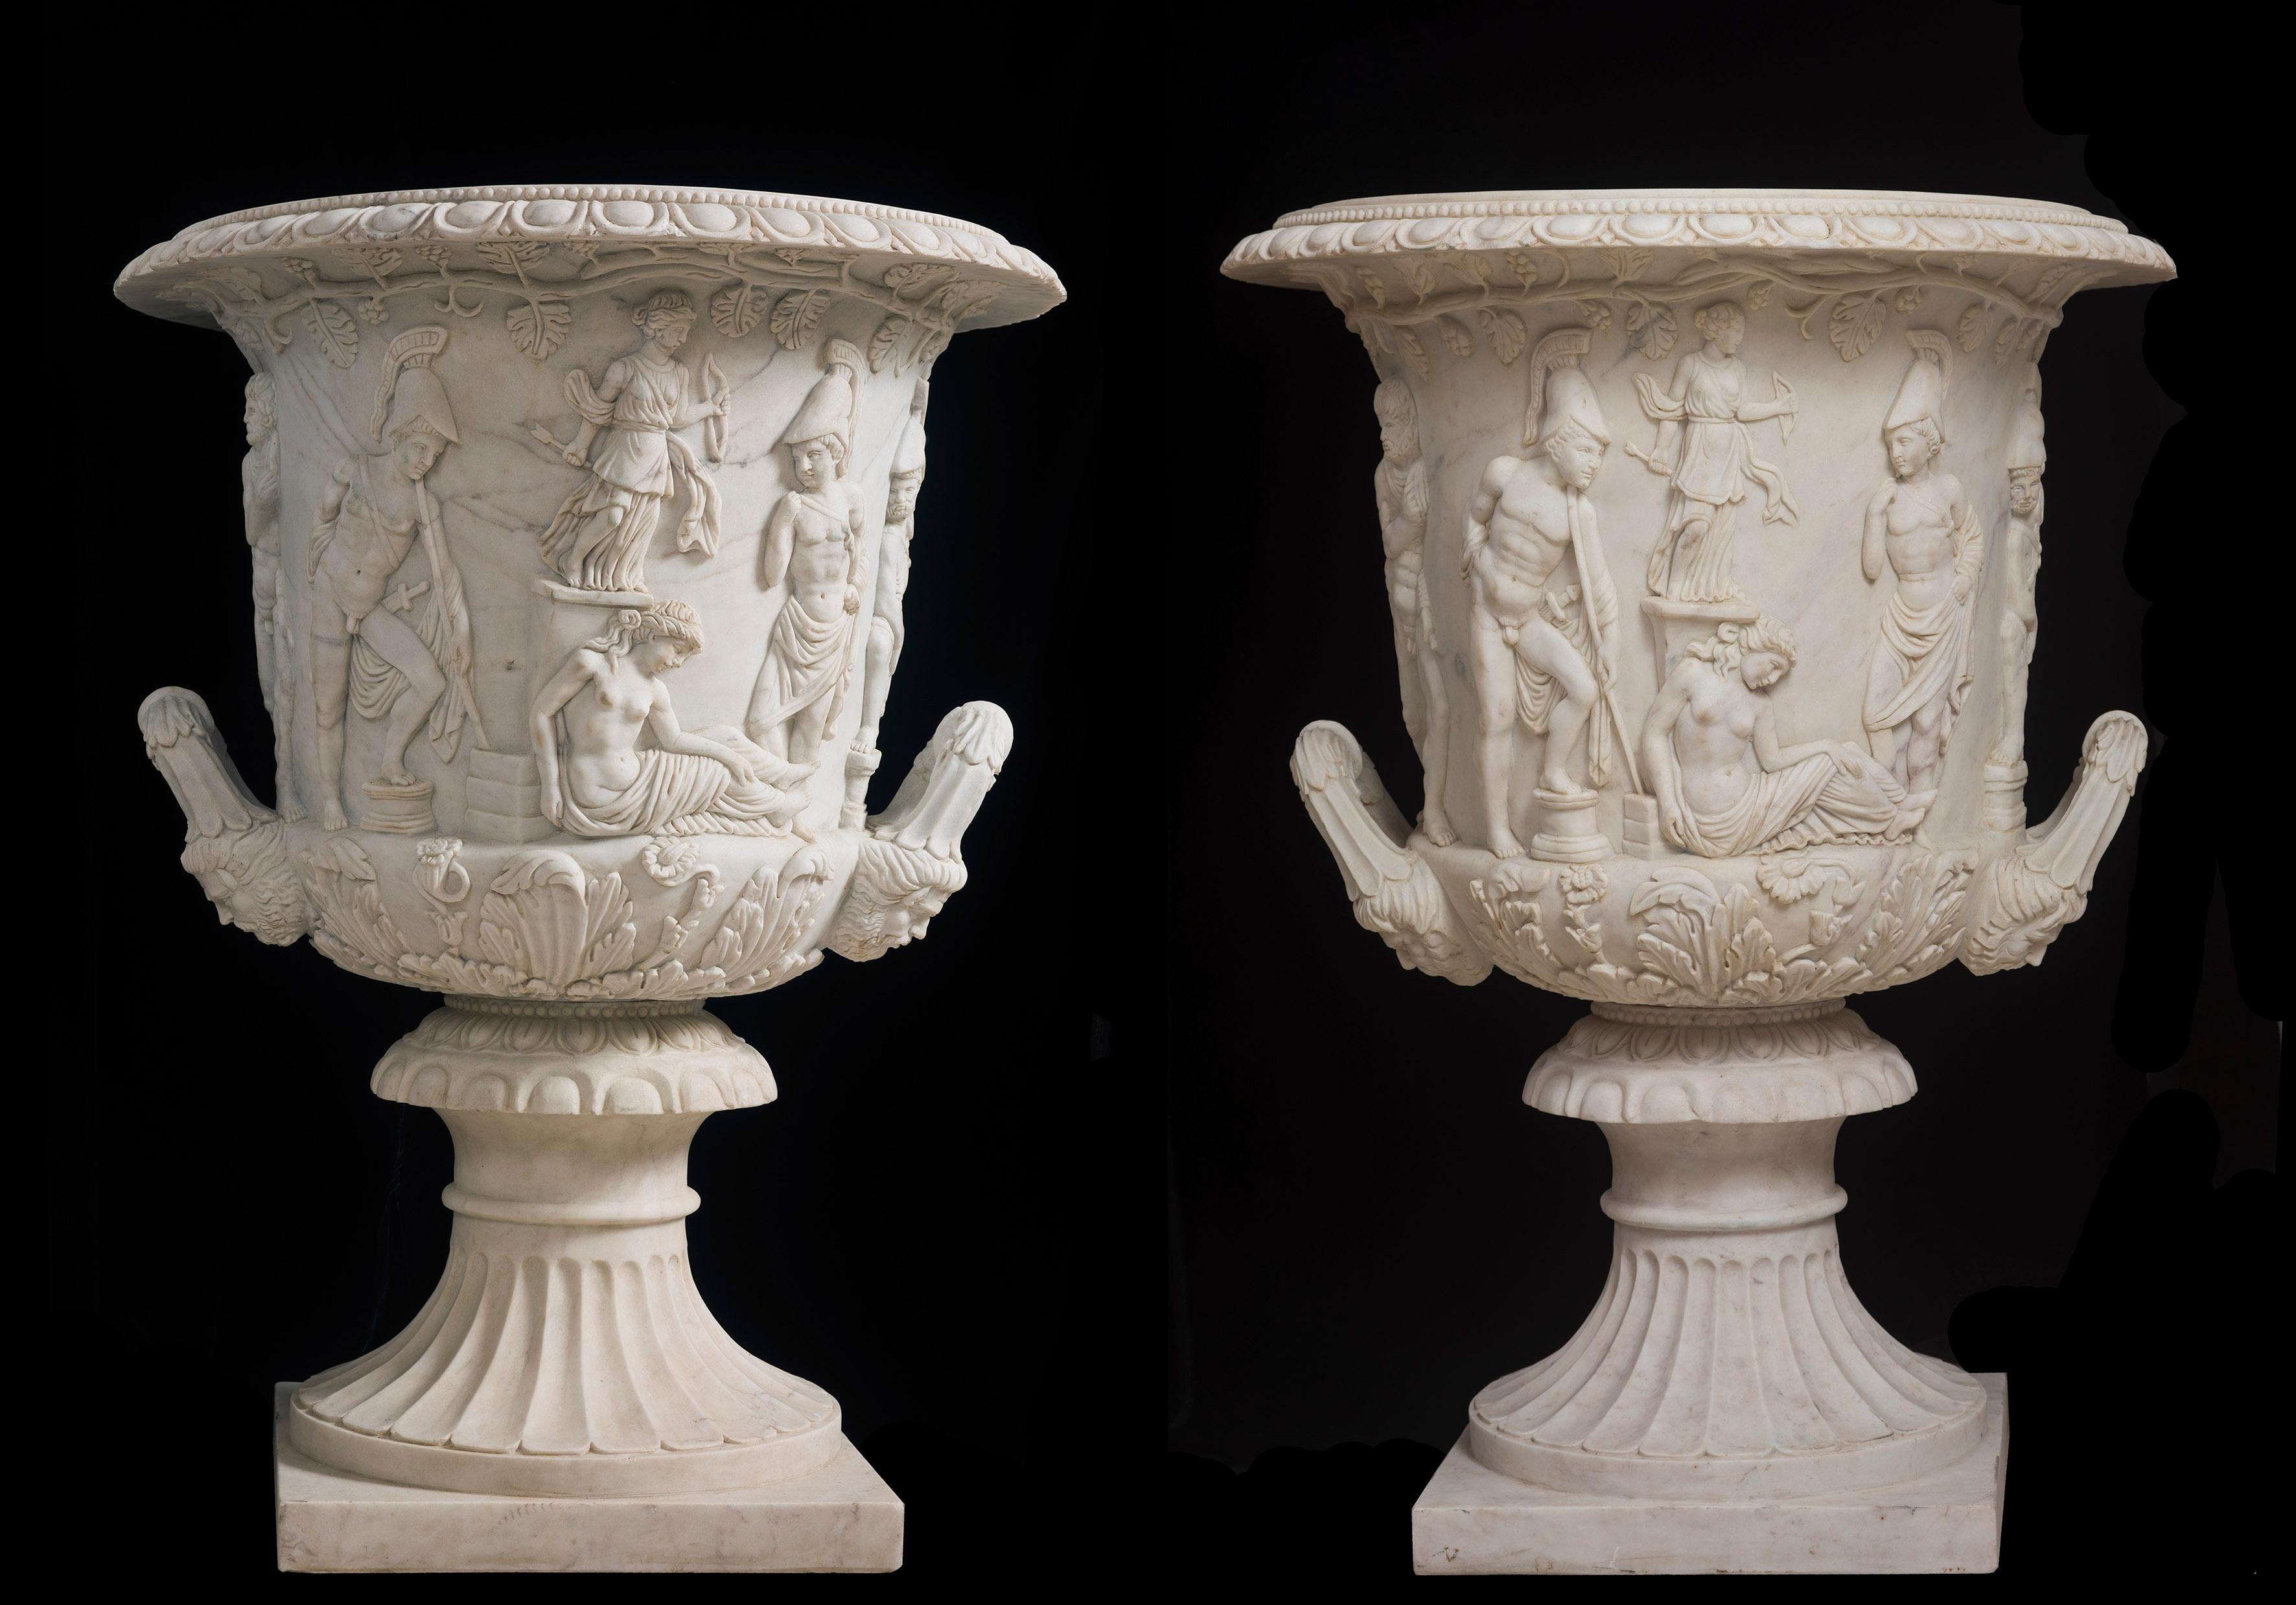 Statuary Marble Italian Statuary White Marble Medici Vase after the Classical Greek For Sale